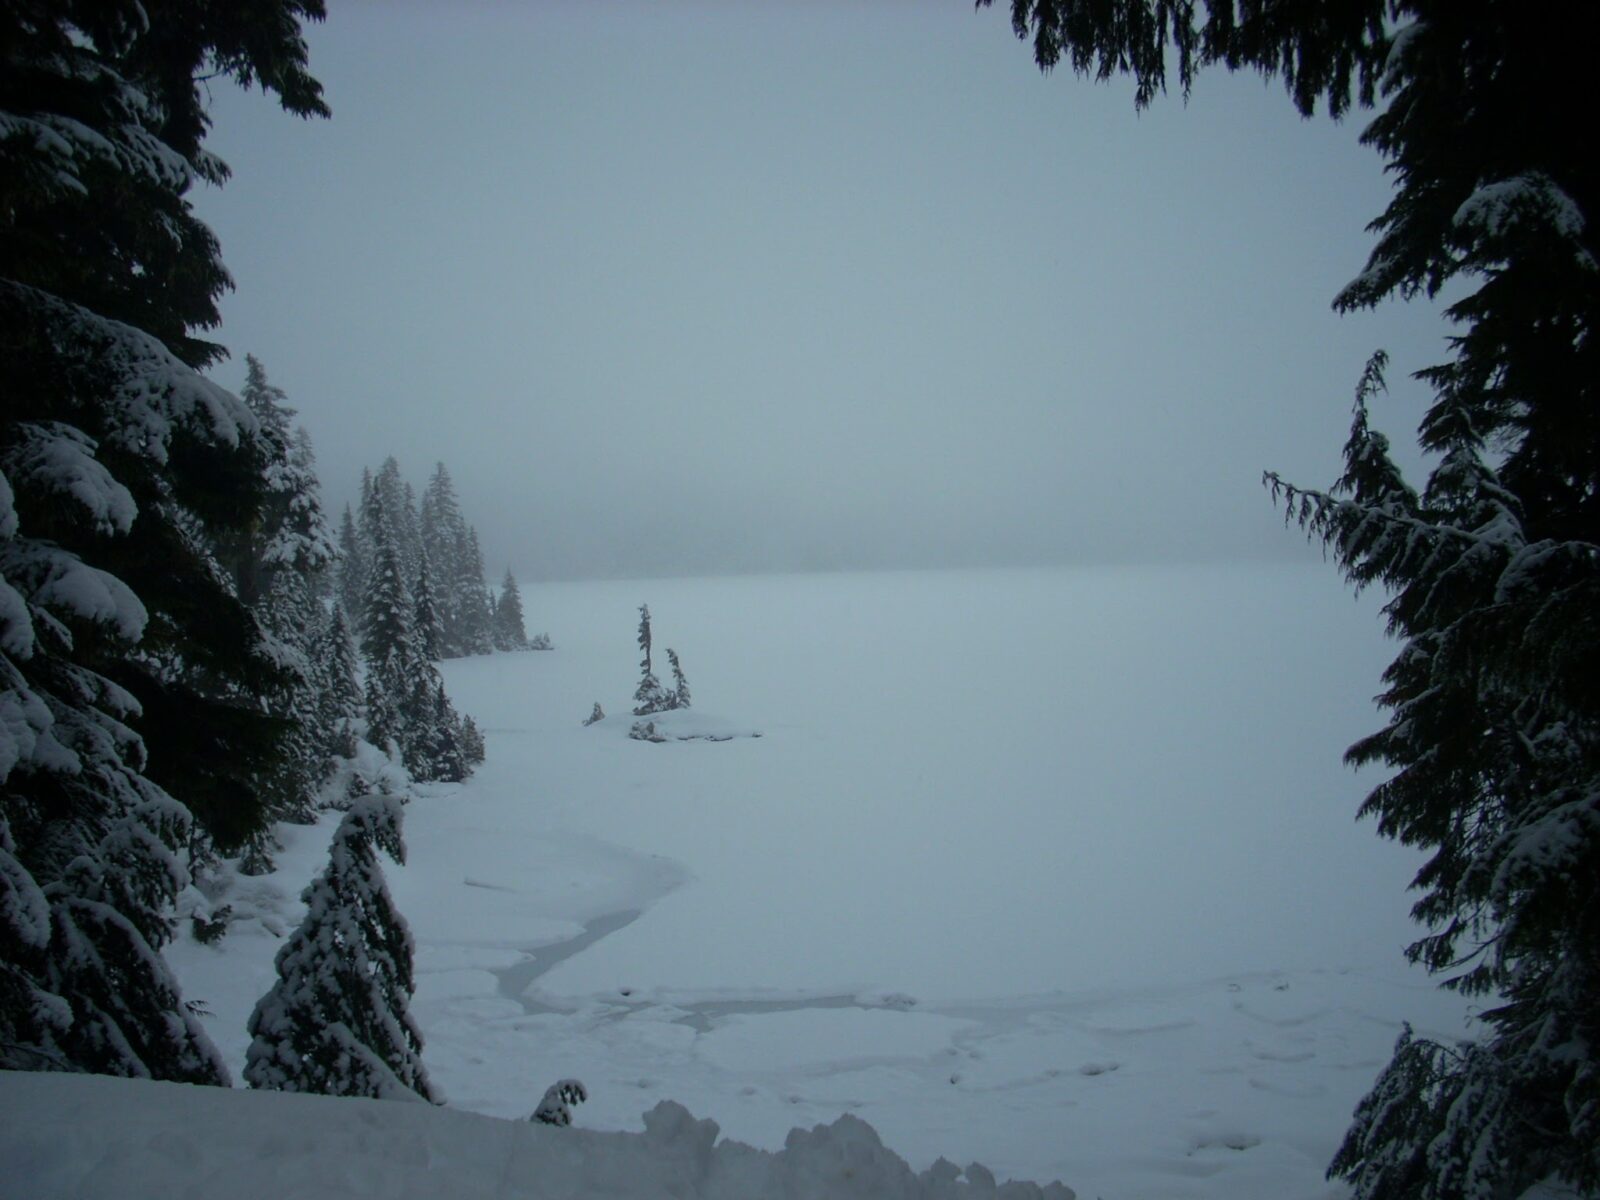 Frozen Mowich Lake in Mt Rainier National Park on a dark and foggy day. The lake is framed by evergreen trees covered in snow.